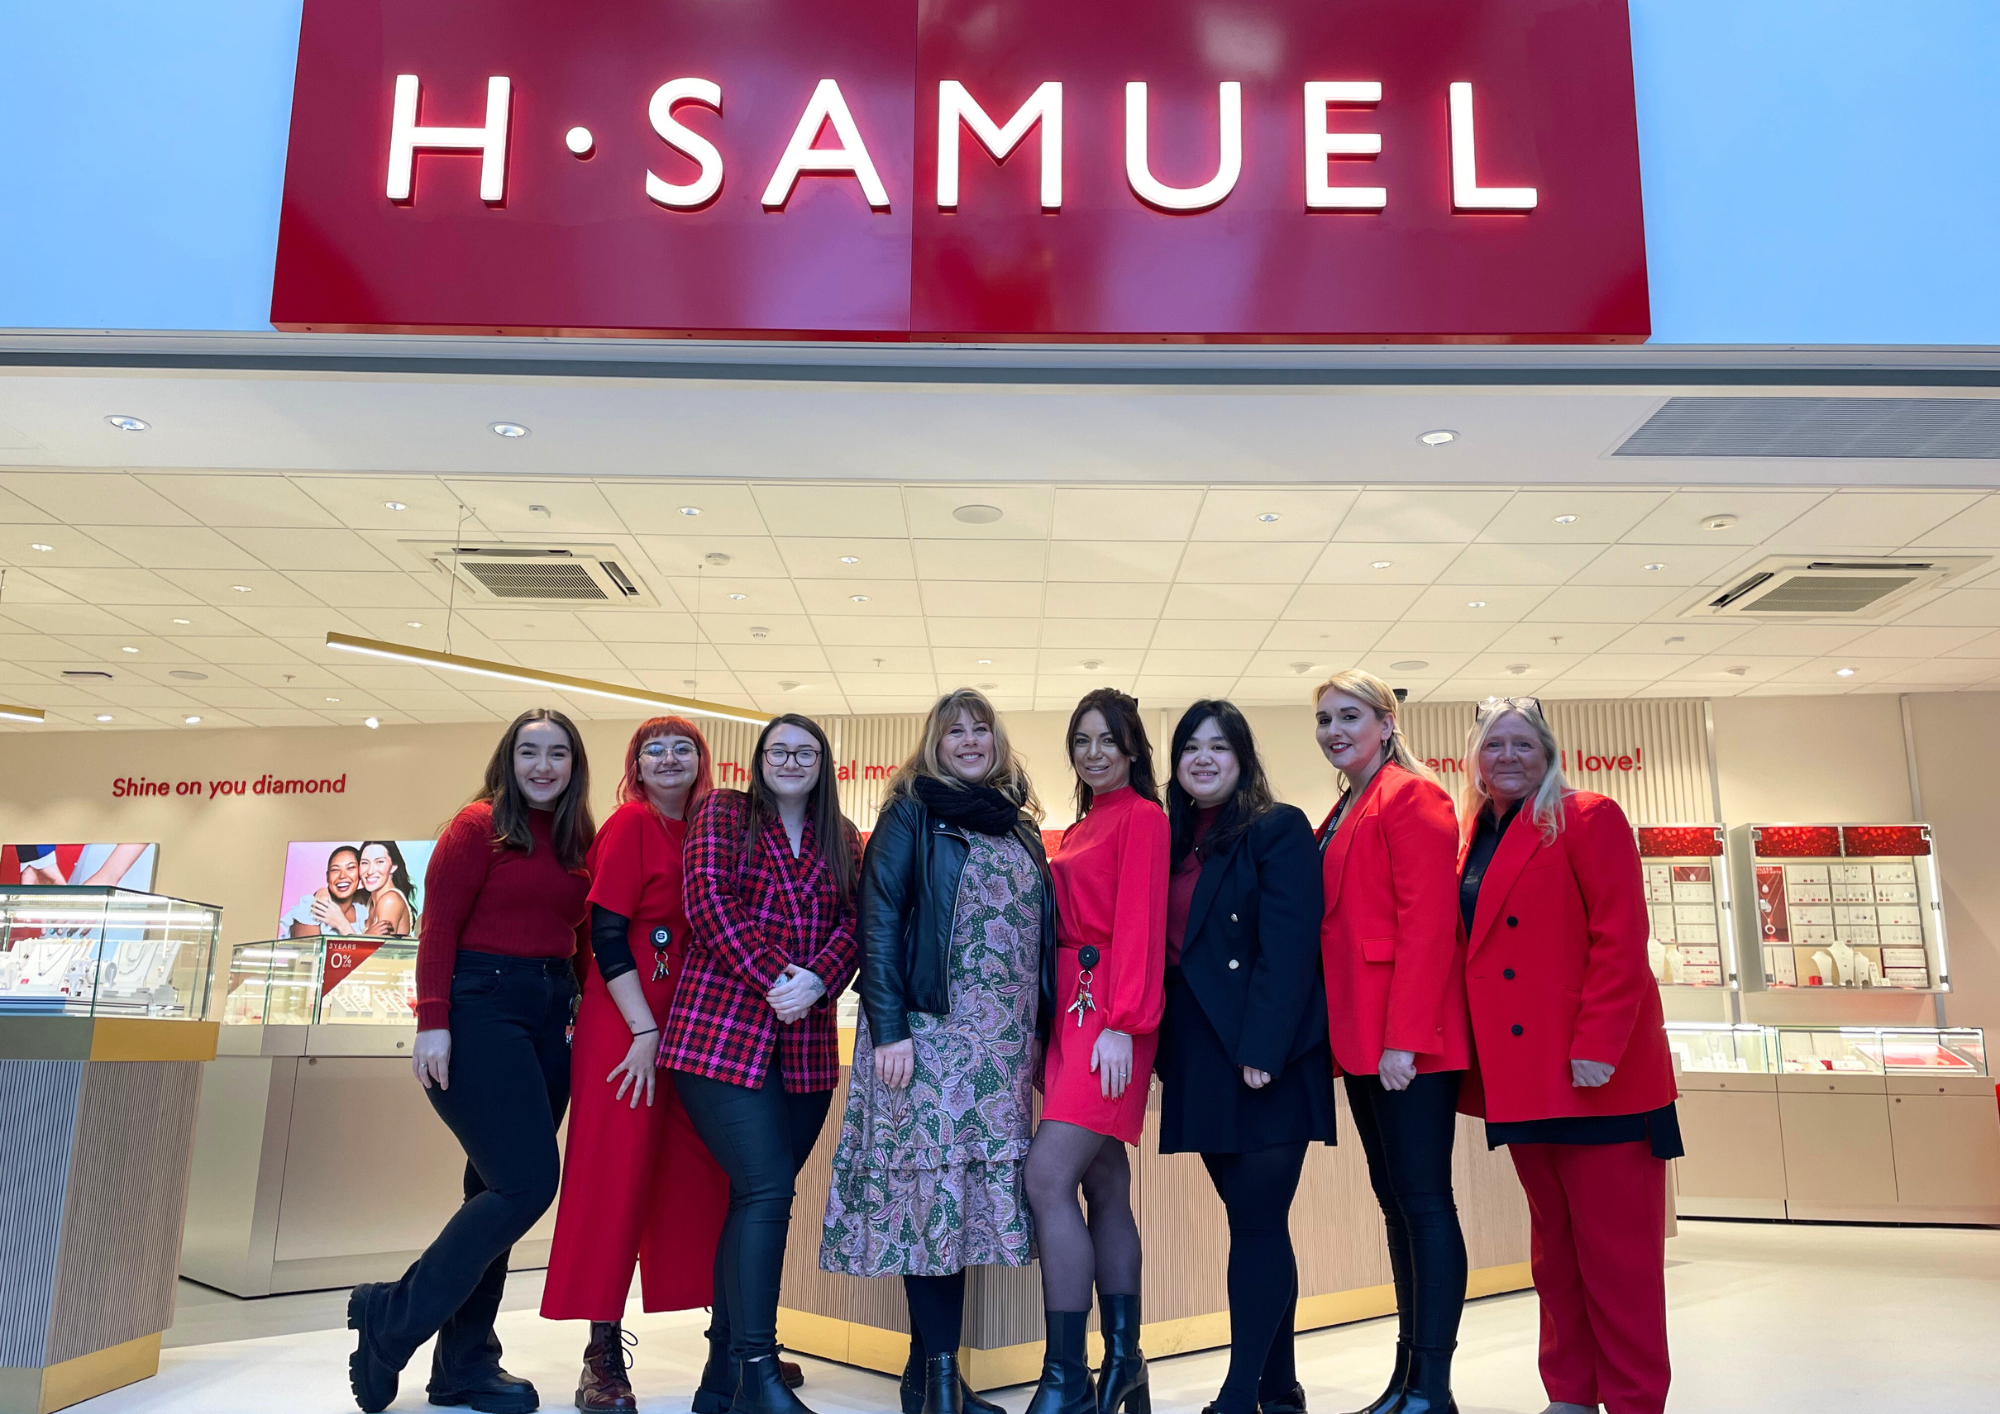 The relaunched H Samuel store at Swansea's Quadrant Shopping Centre